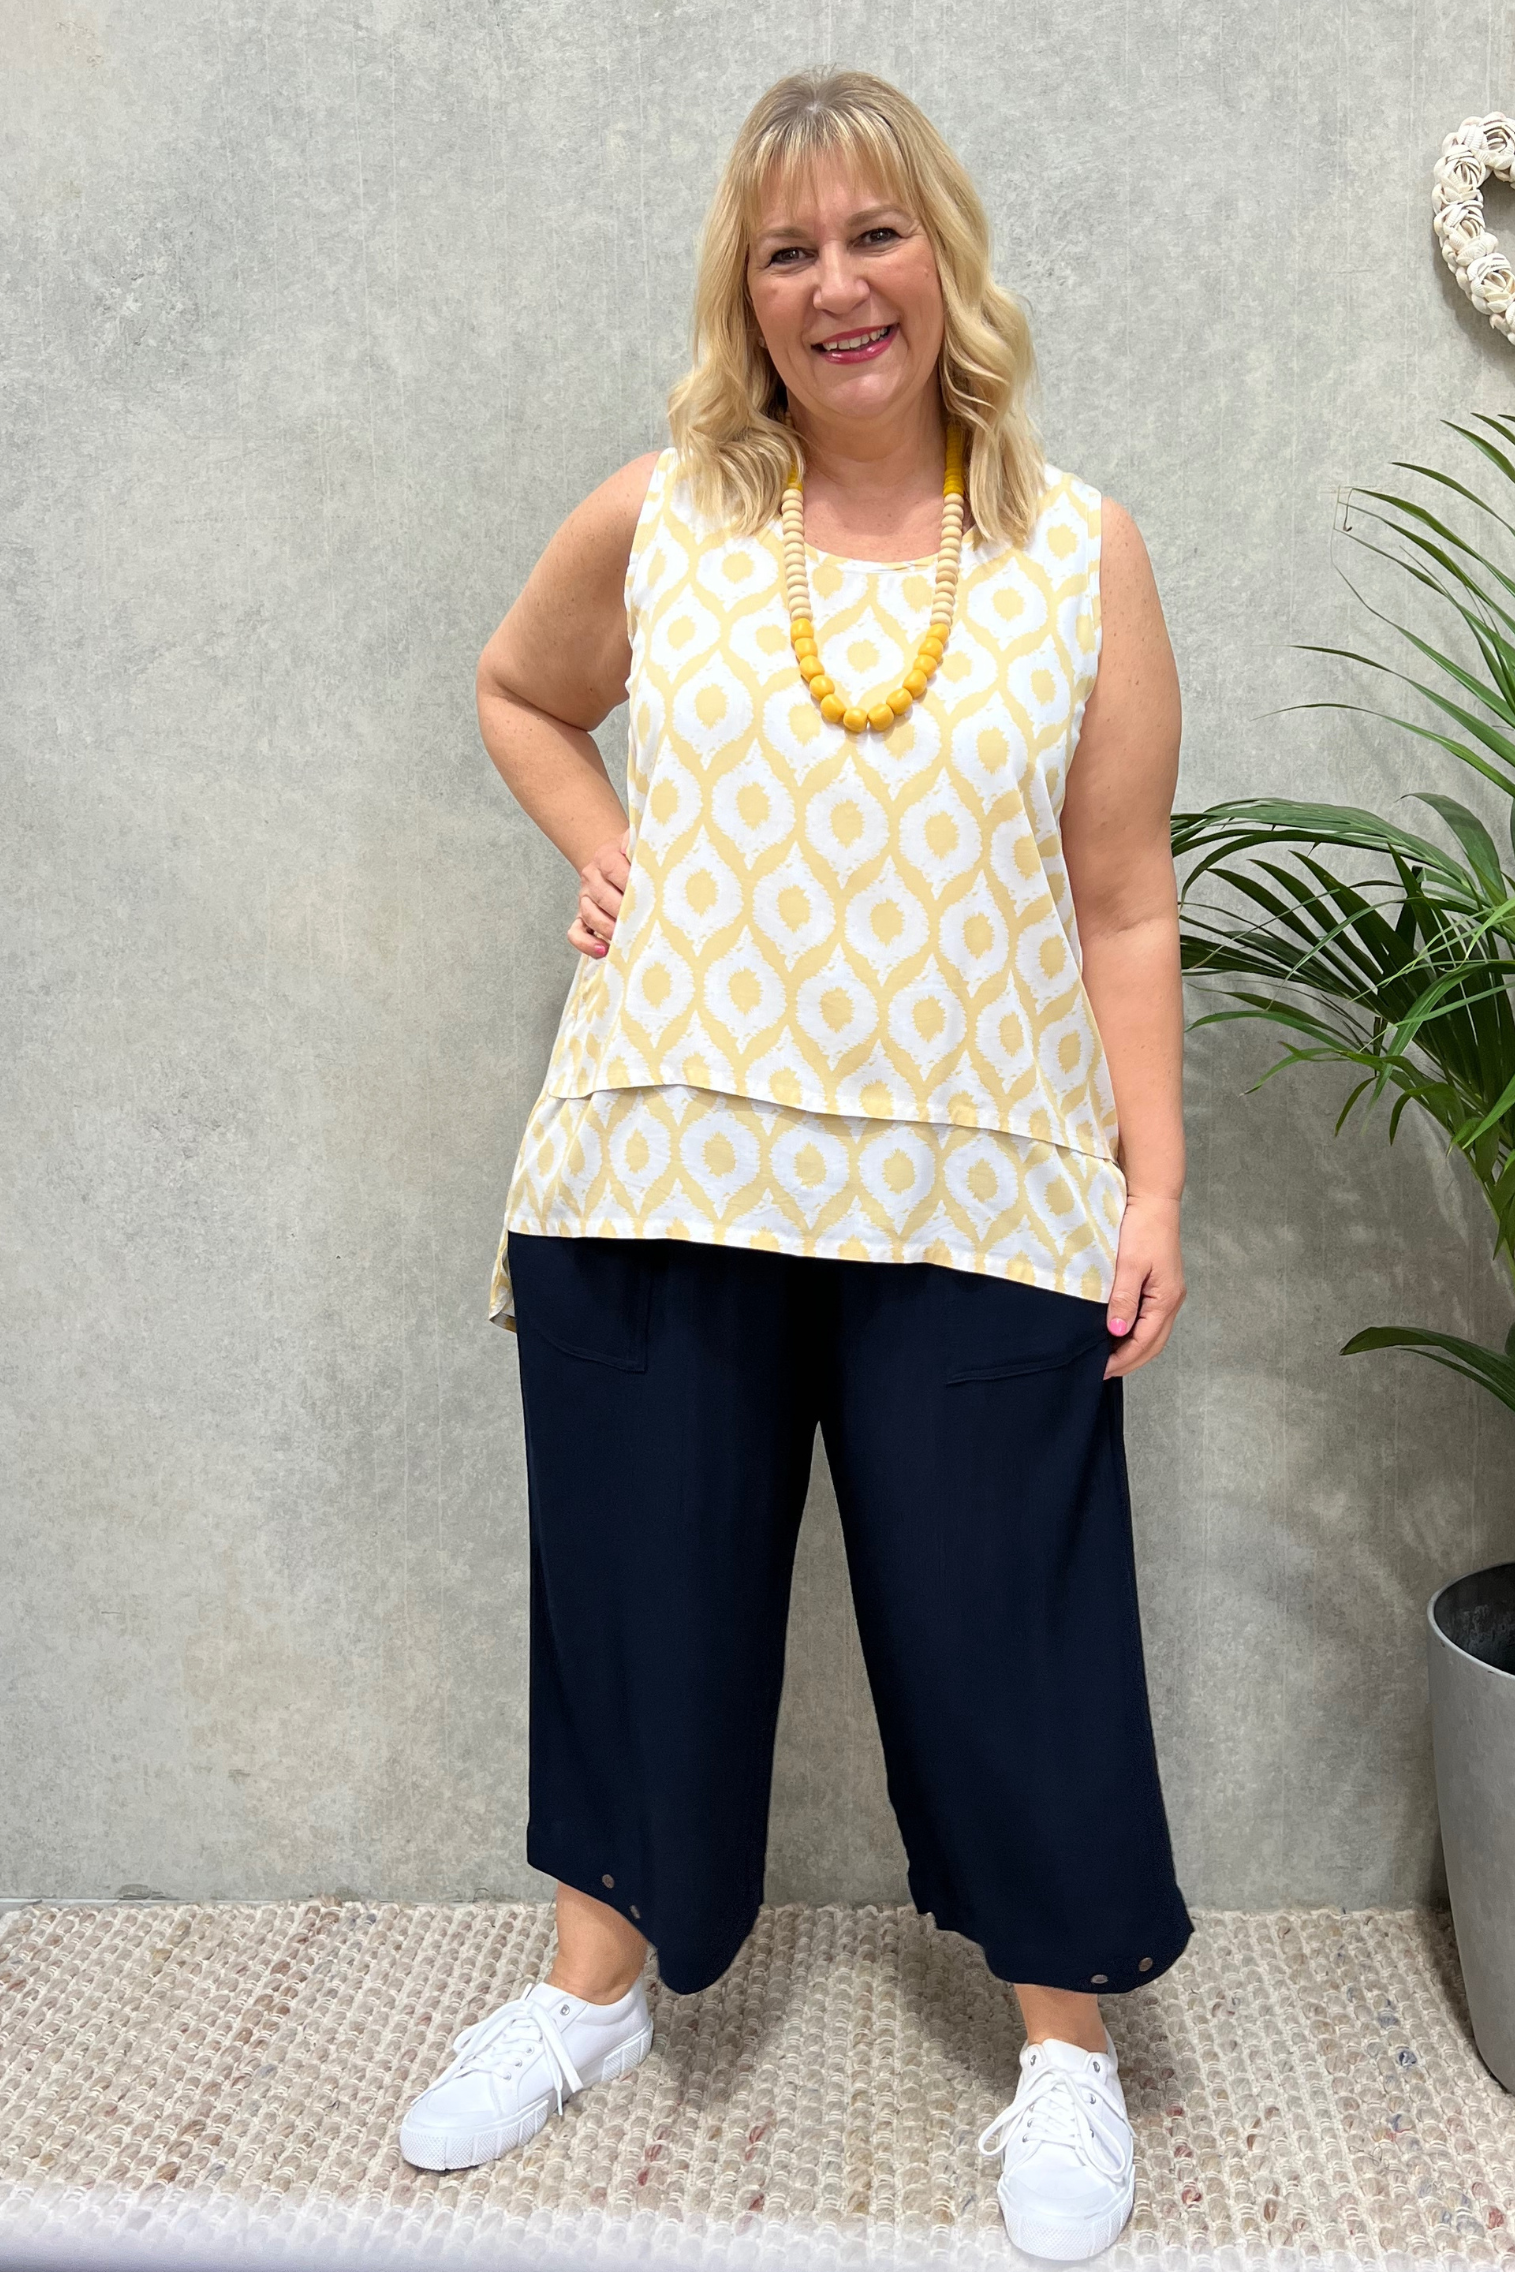 soft lemon shade layered no sleeve Tunic worn by Kita Ku blonde model  over navy wide pant and white sneakers.